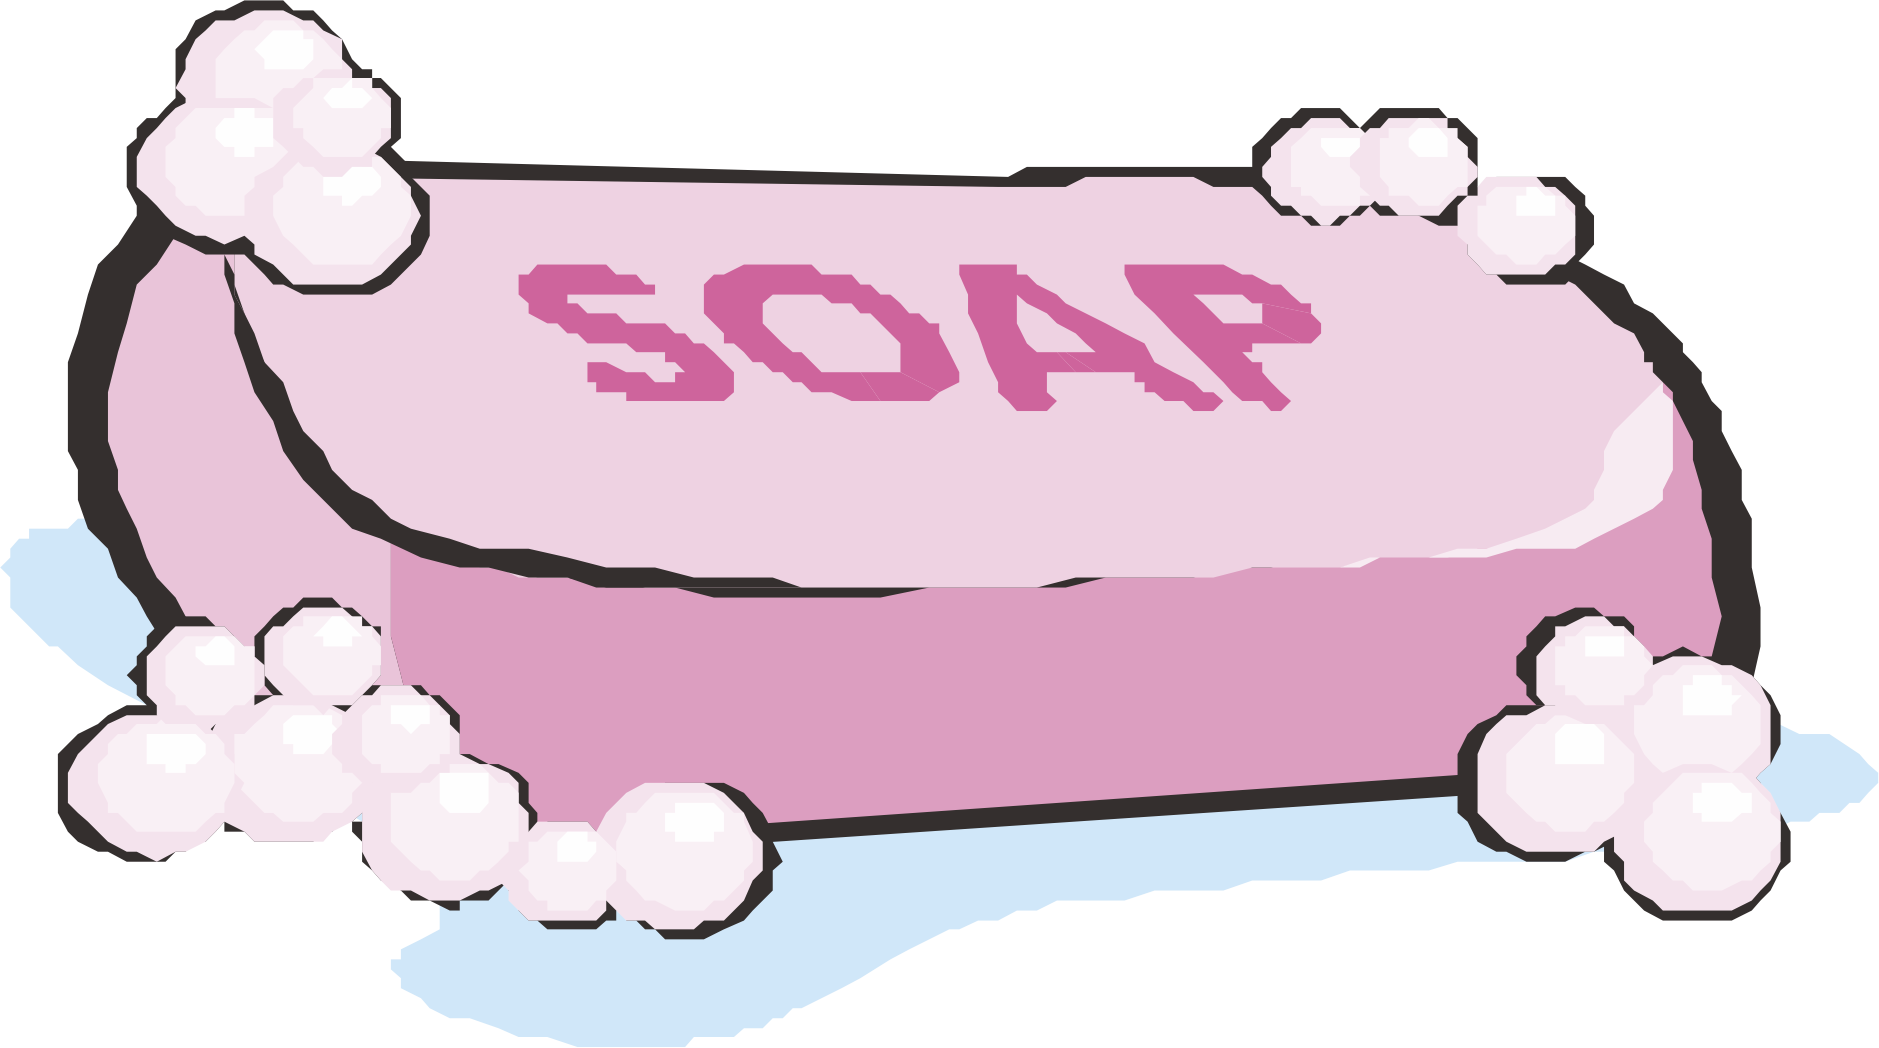 Soap clipart pink soap, Soap pink soap Transparent FREE for download on ...